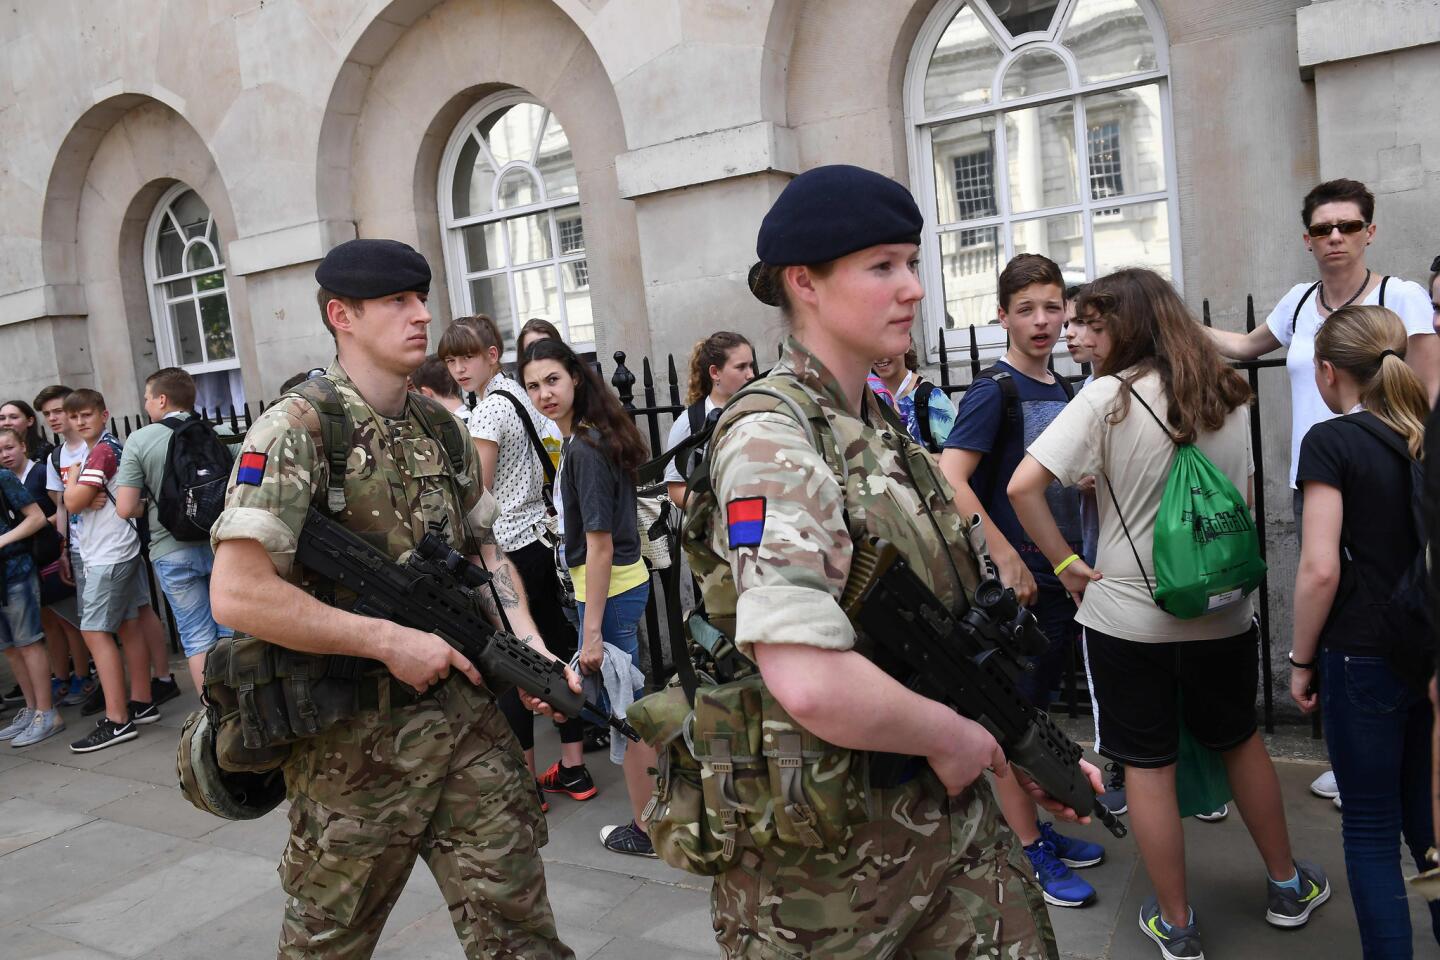 British Army soldiers patrol along Whitehall near Downing Street and the Houses of Parliament in central London on May 24, 2017.